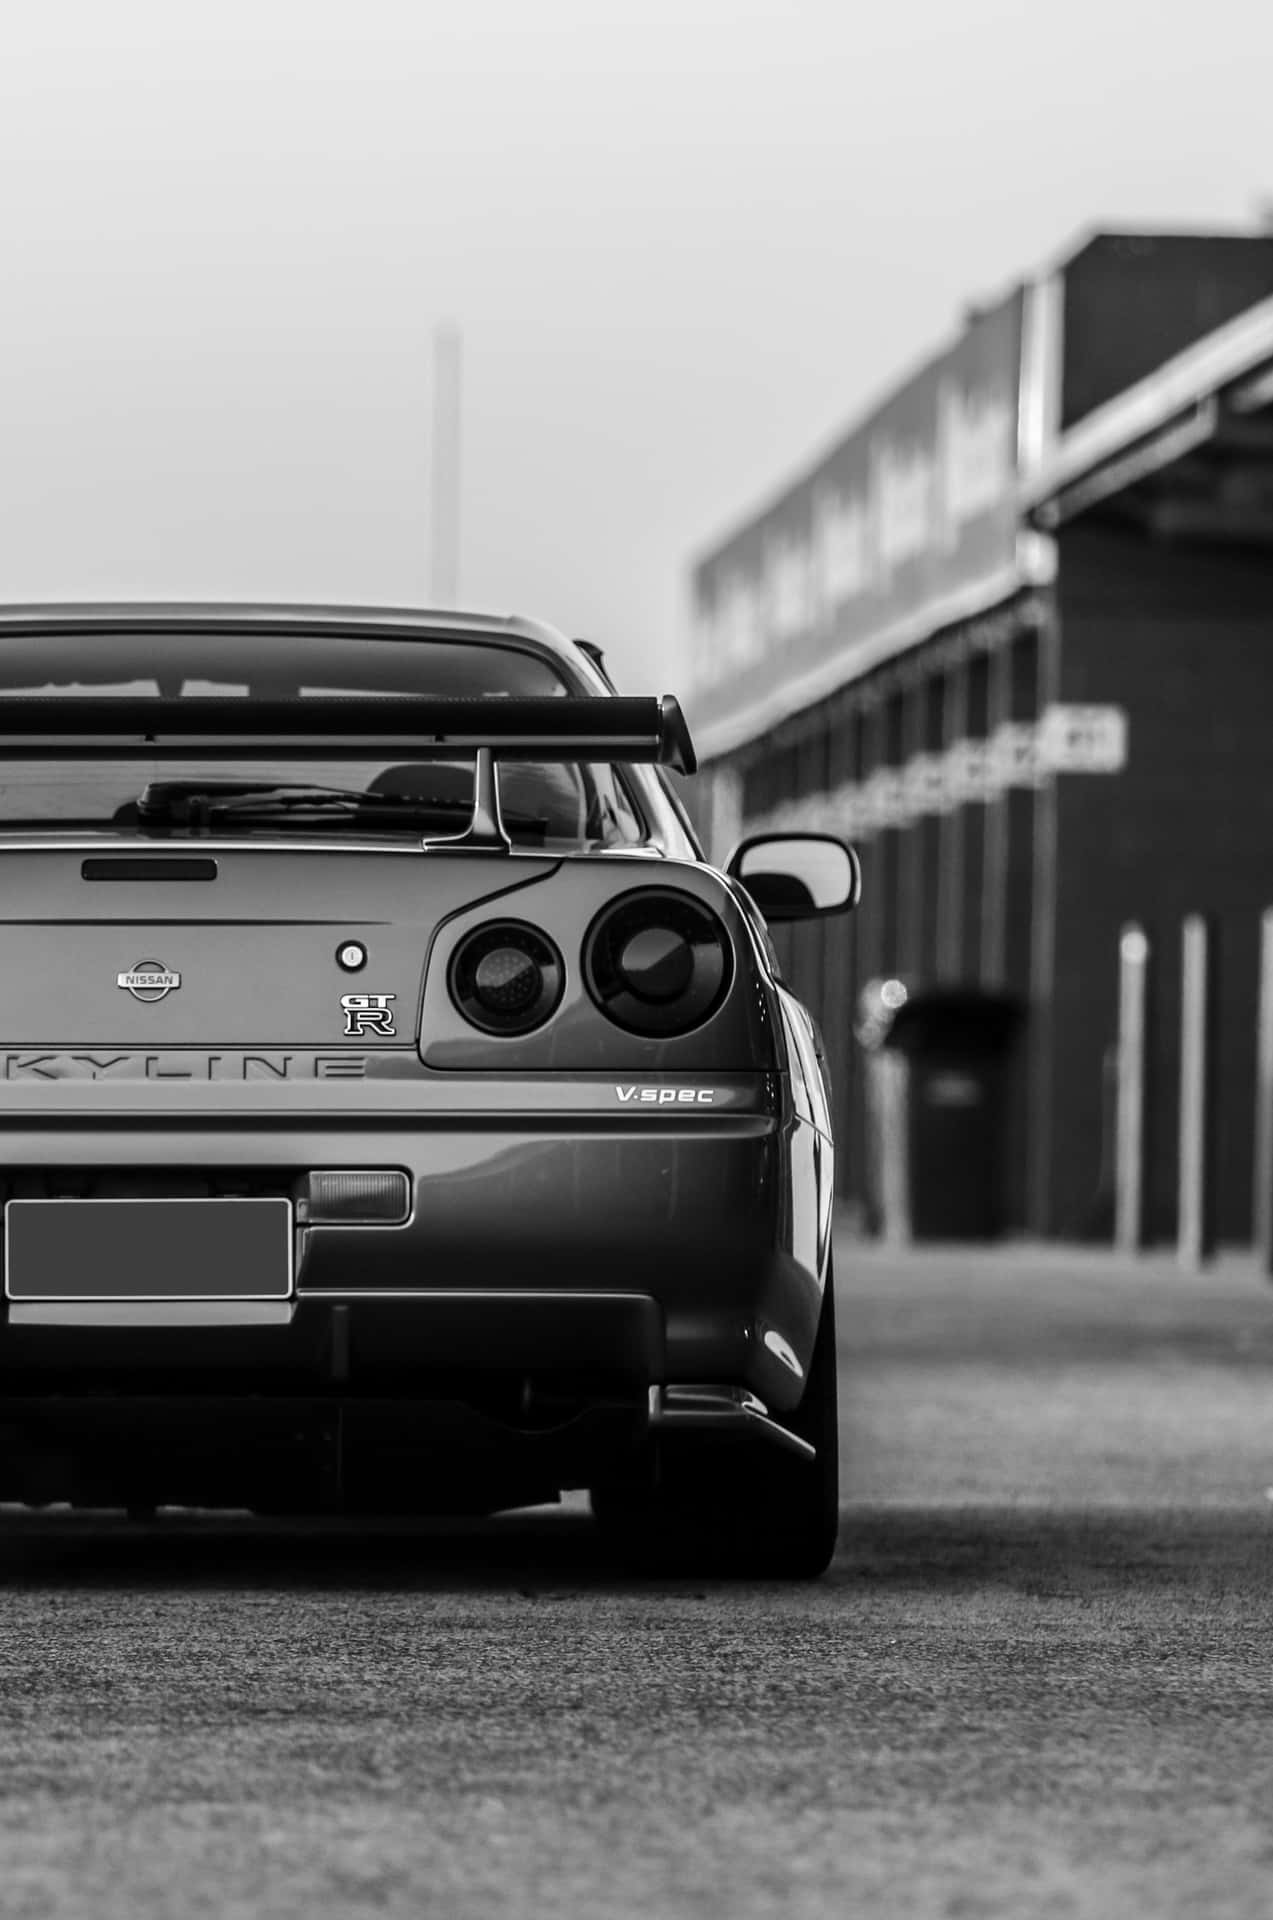 Get Ready For a Thrill Ride With the Gtr Iphone Wallpaper